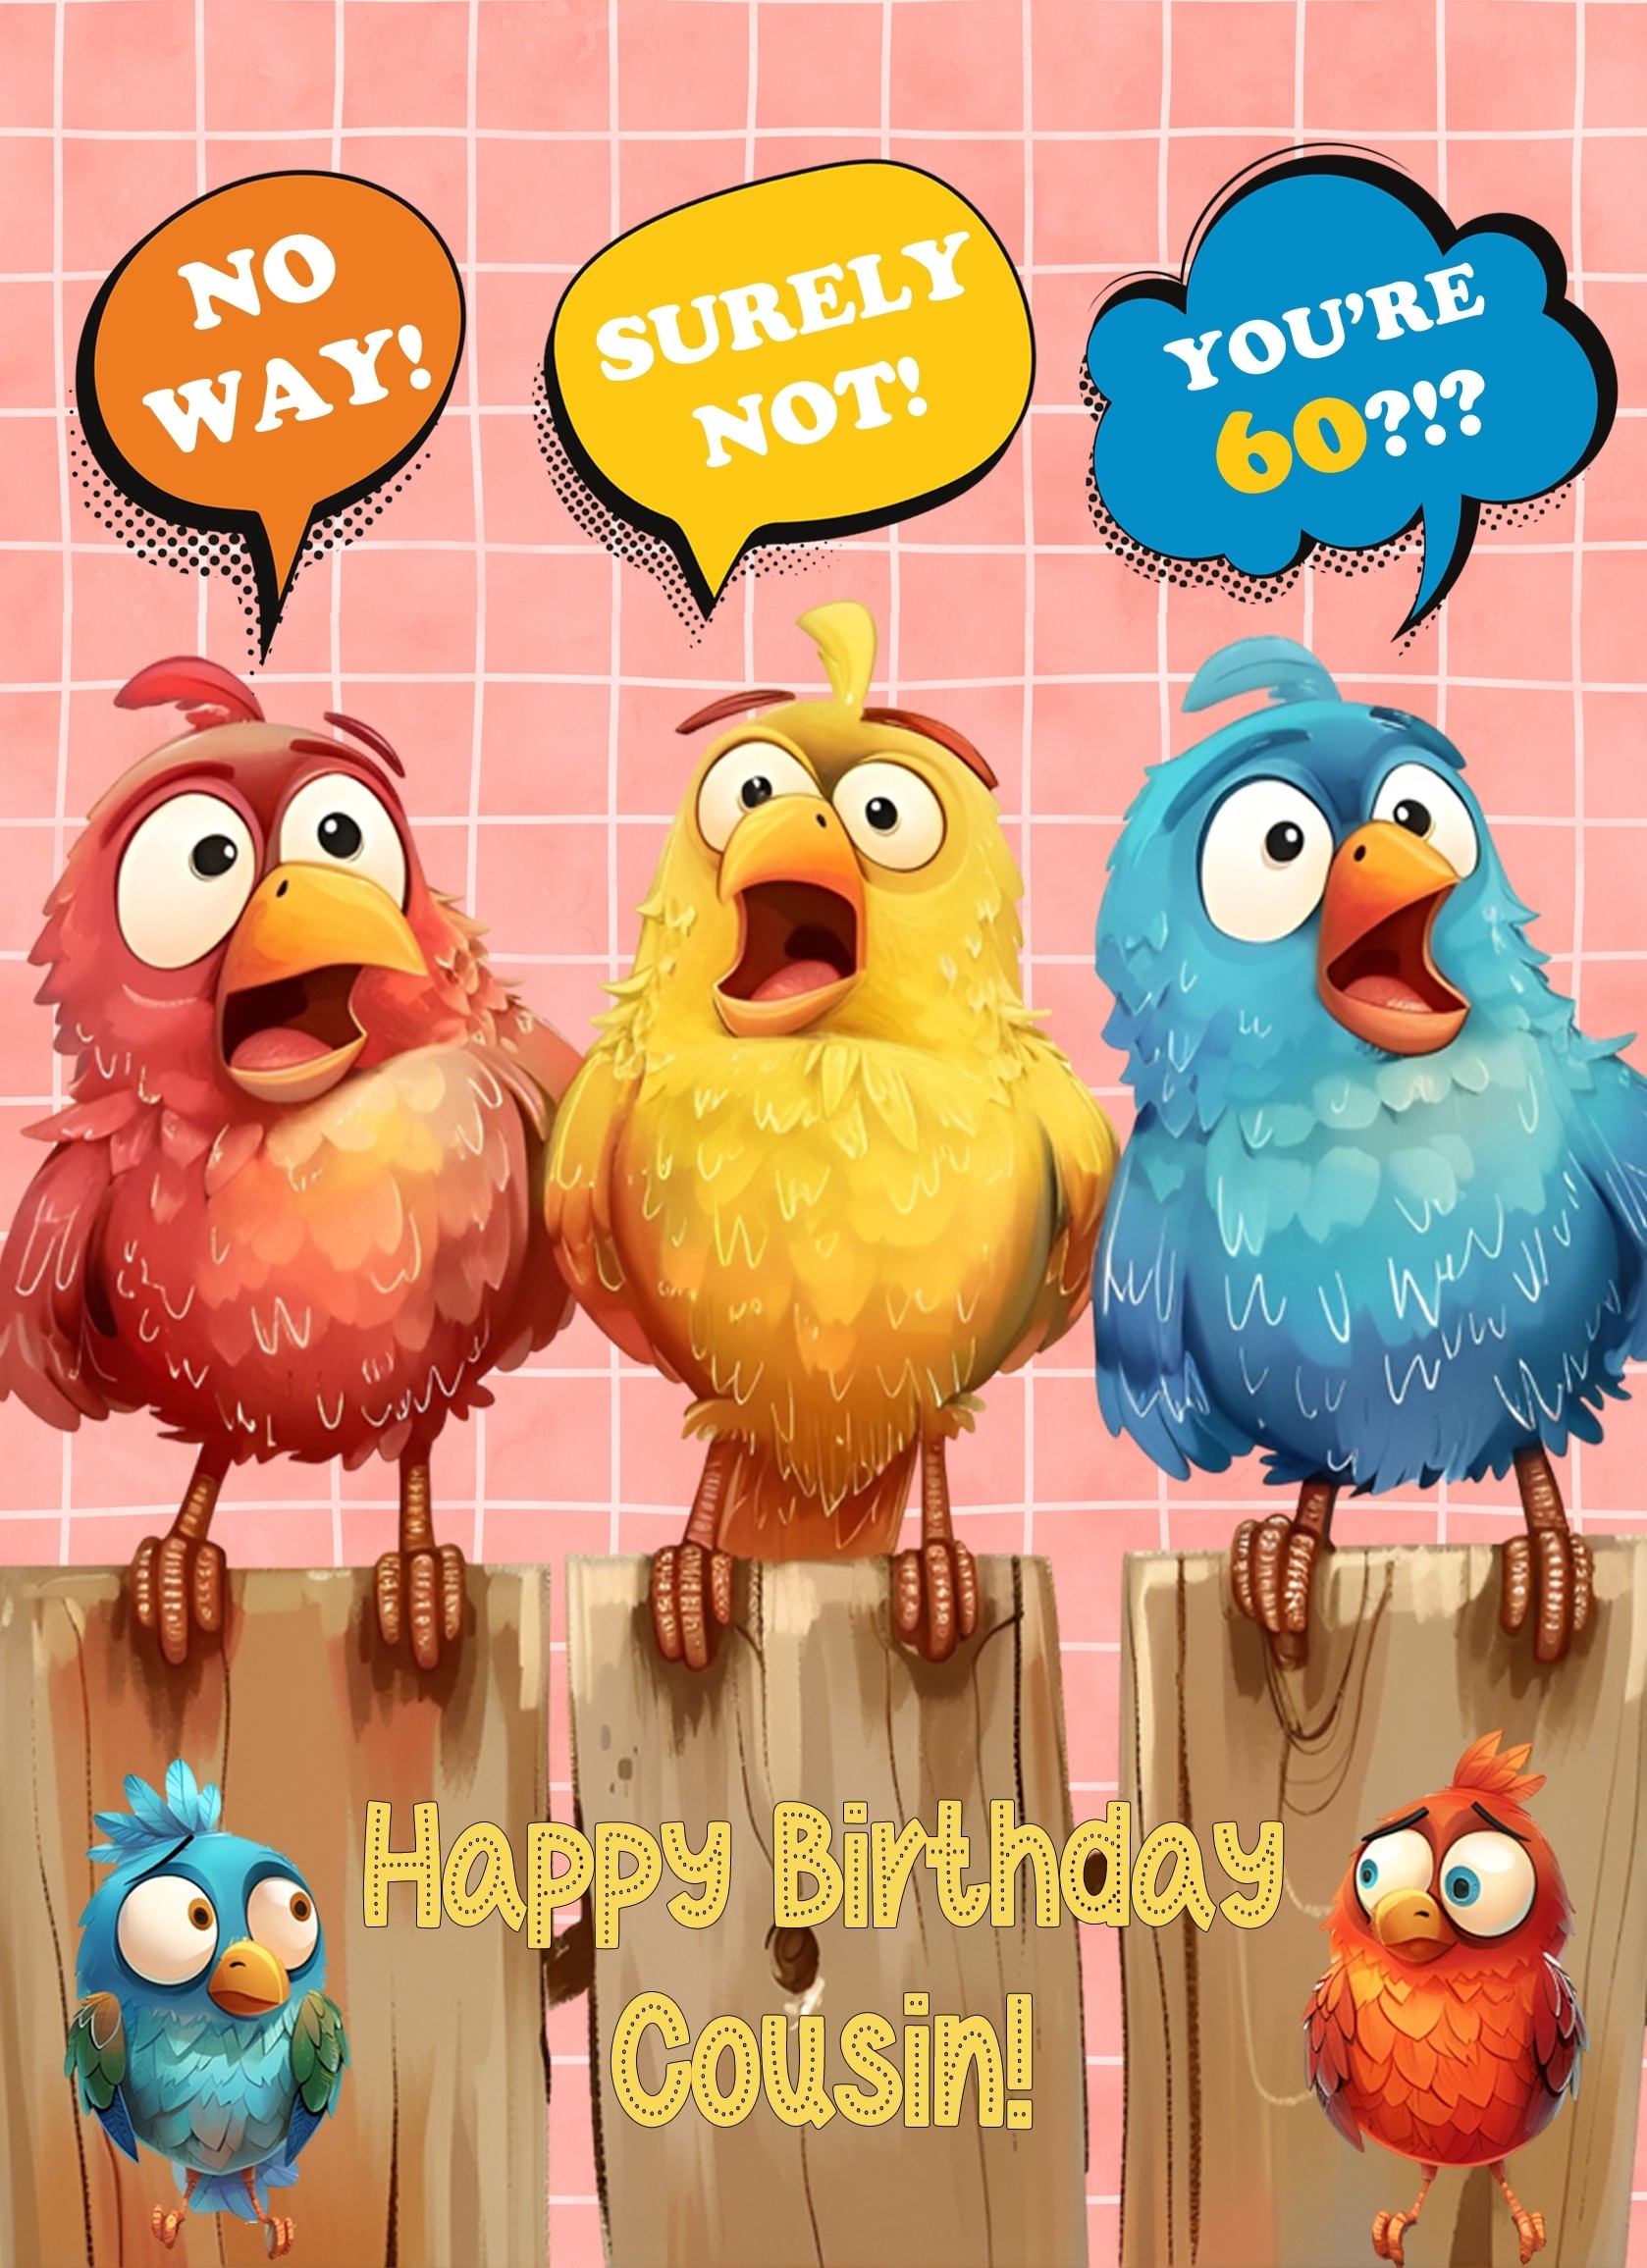 Cousin 60th Birthday Card (Funny Birds Surprised)